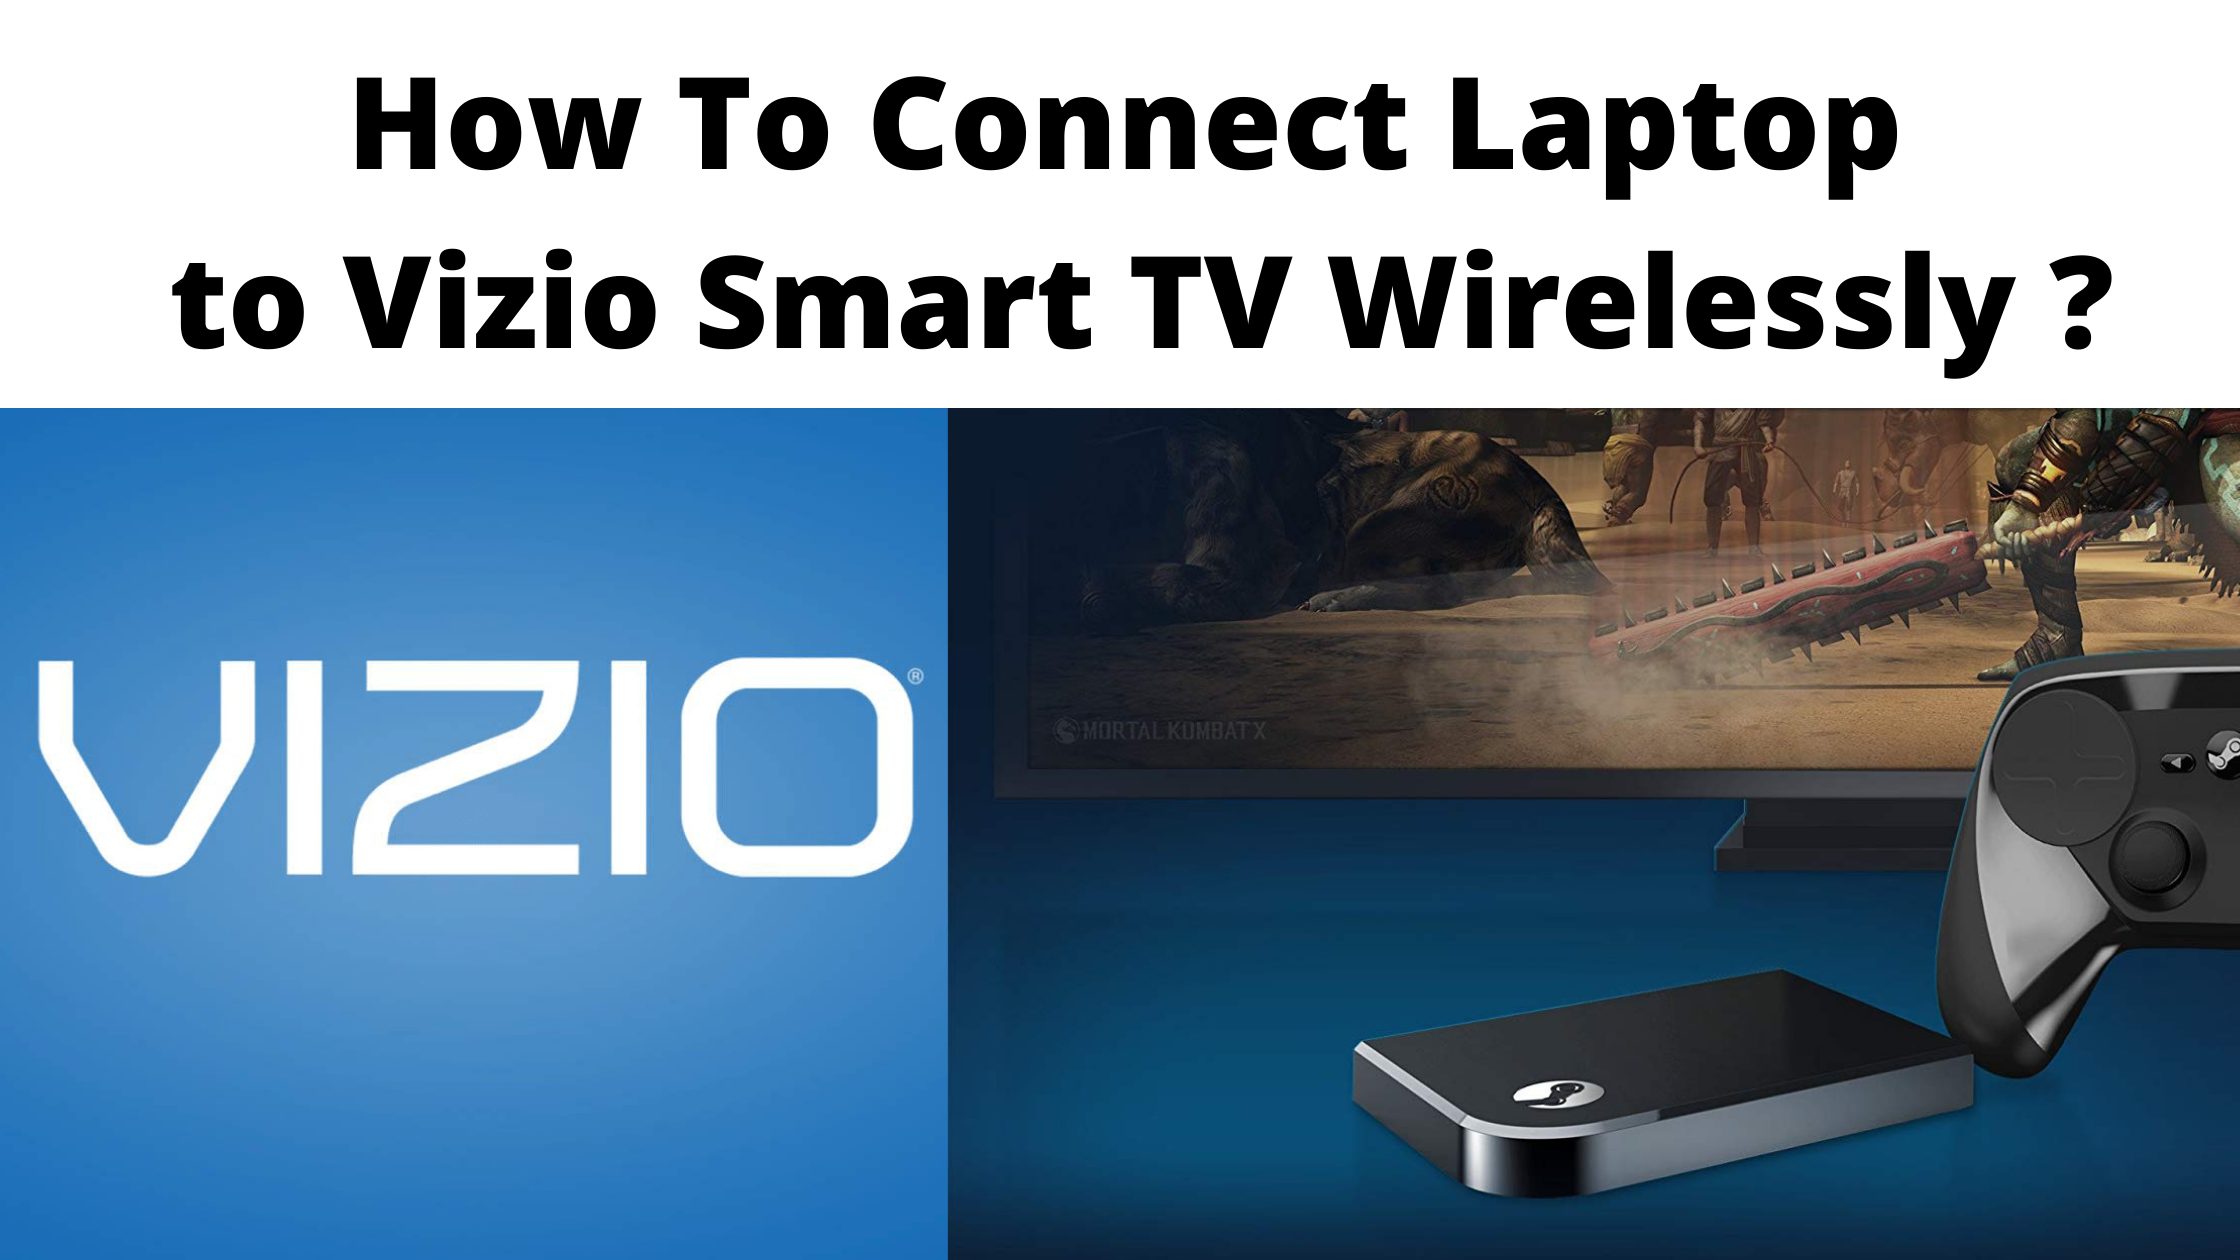 How to Connect Laptop to Vizio Smart TV